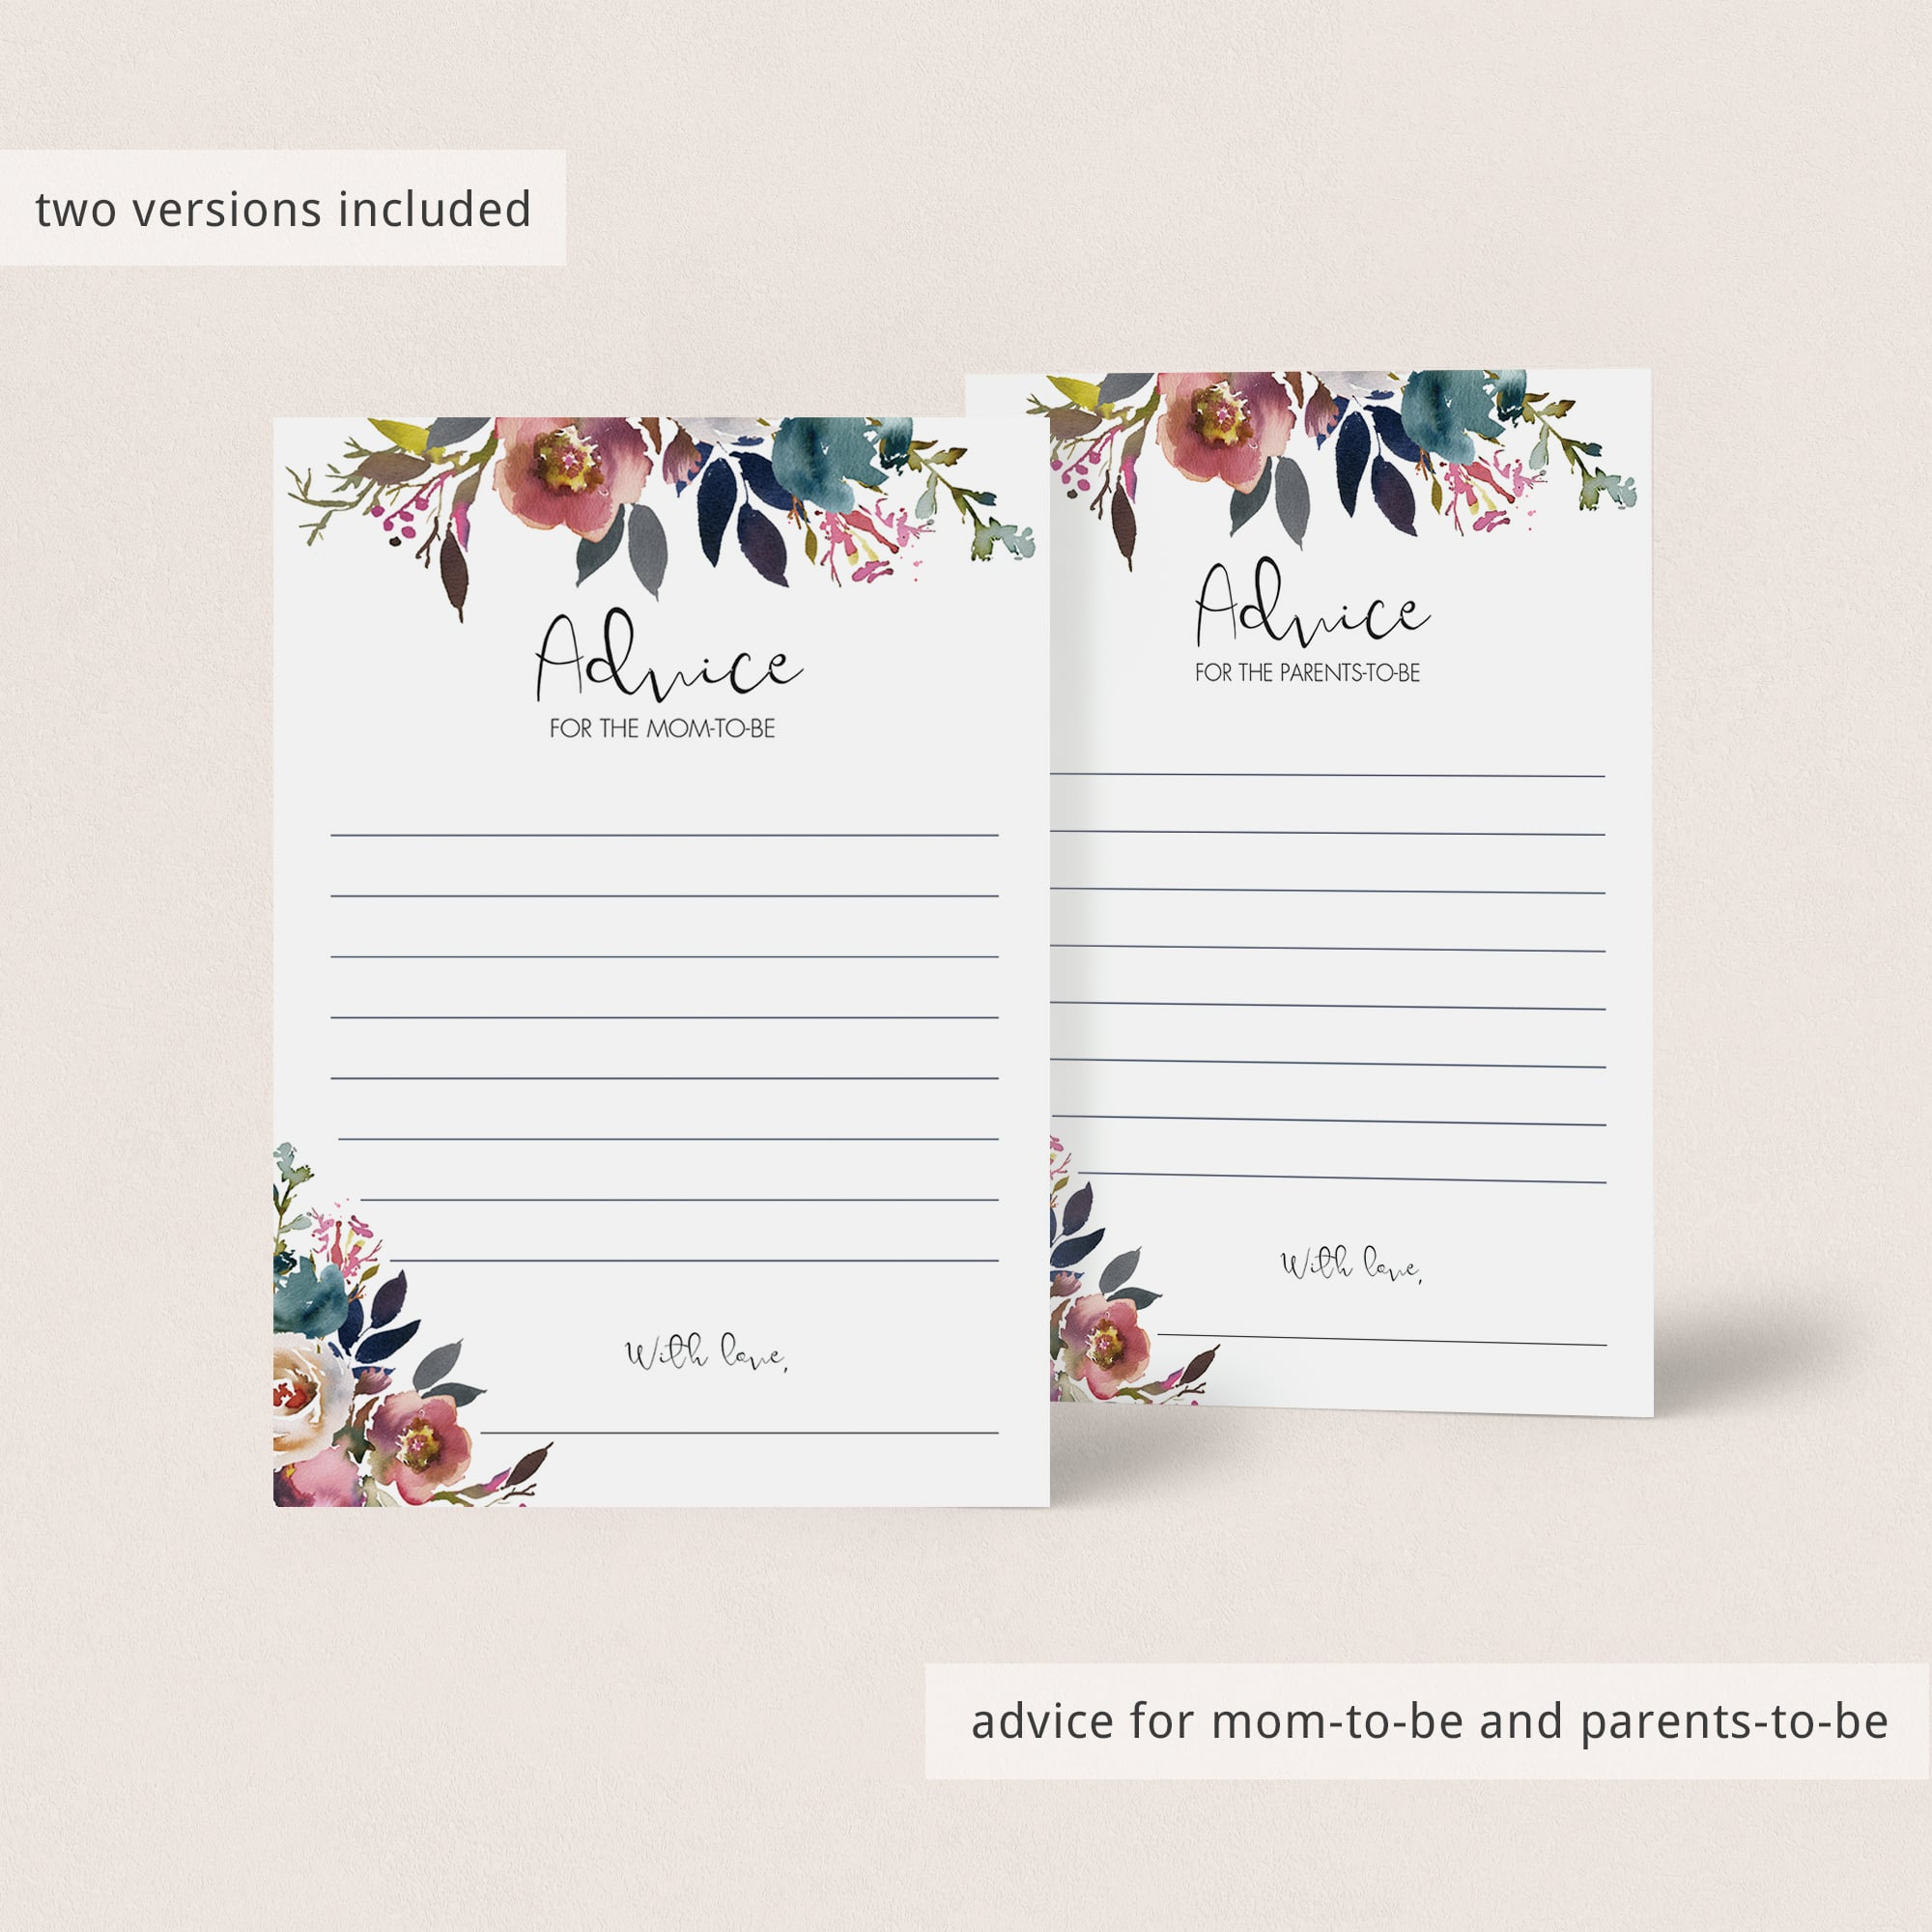 Printable baby advice cards for floral themed party by LittleSizzle